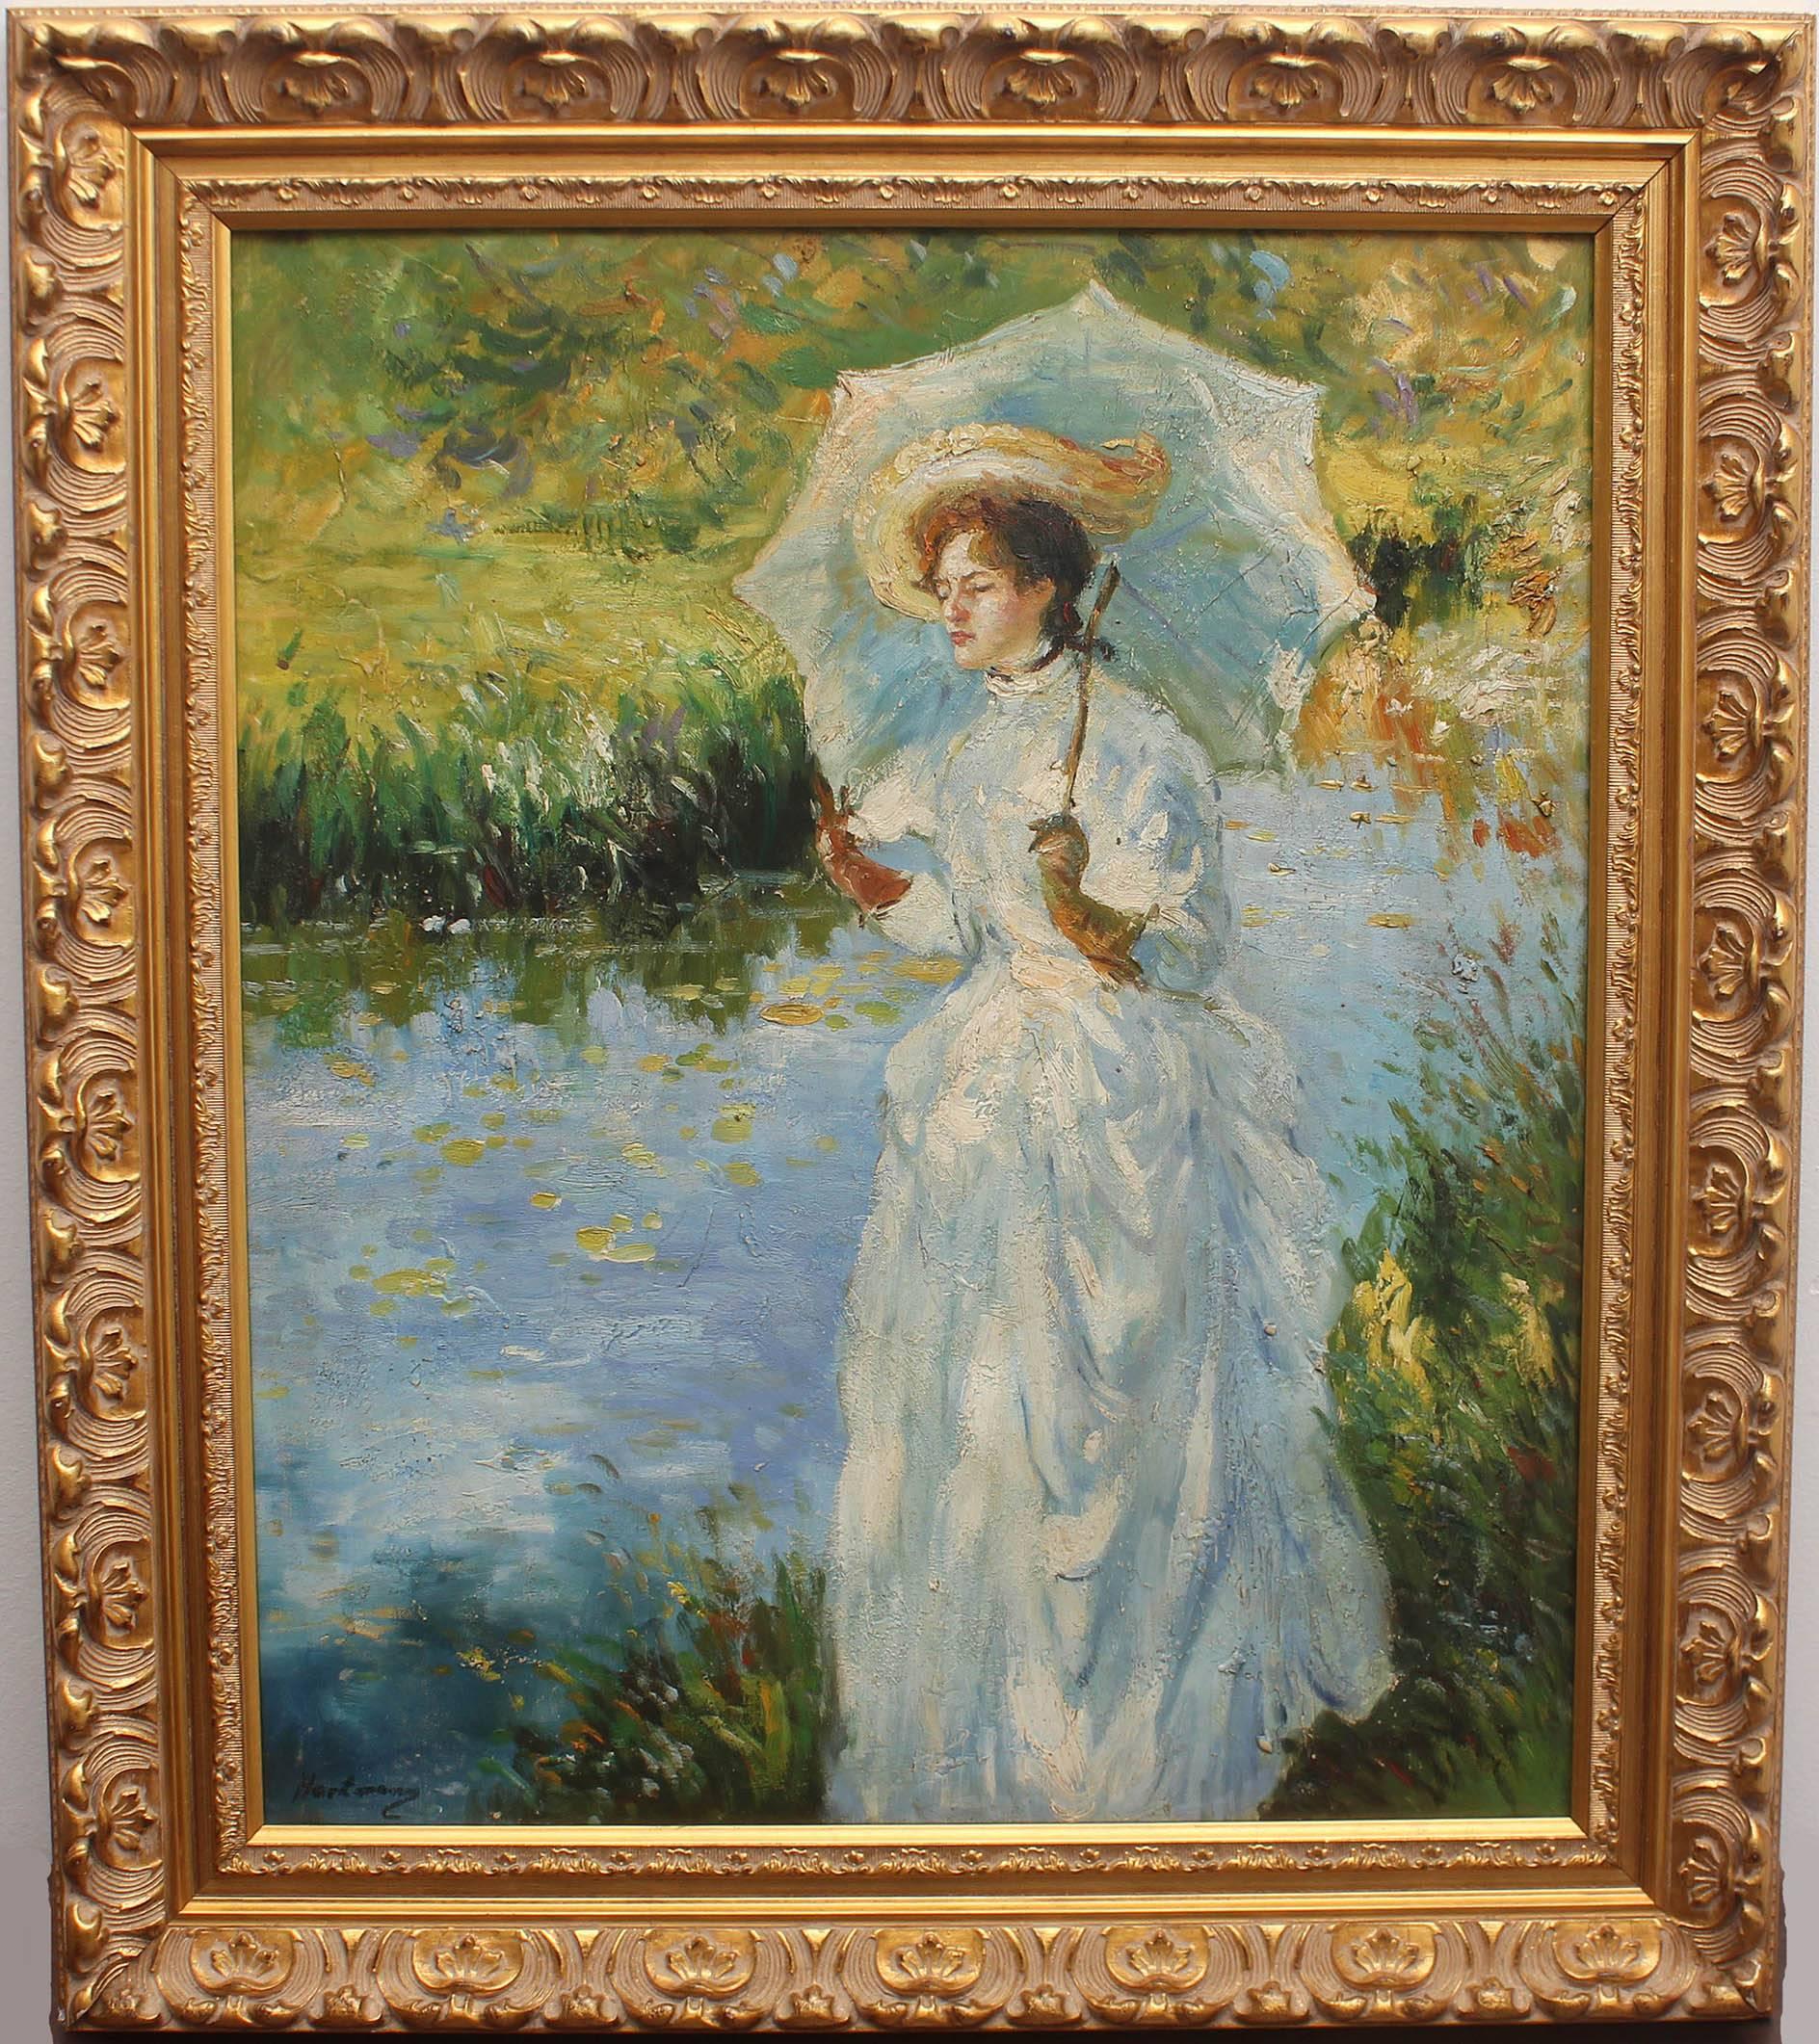 Bright impressionist oil painting, "Lady with a Parasol". Oil on canvas. Signed Hartmann. We have not been able to find any biographical information on the artist. Well painted with heavy impasto.